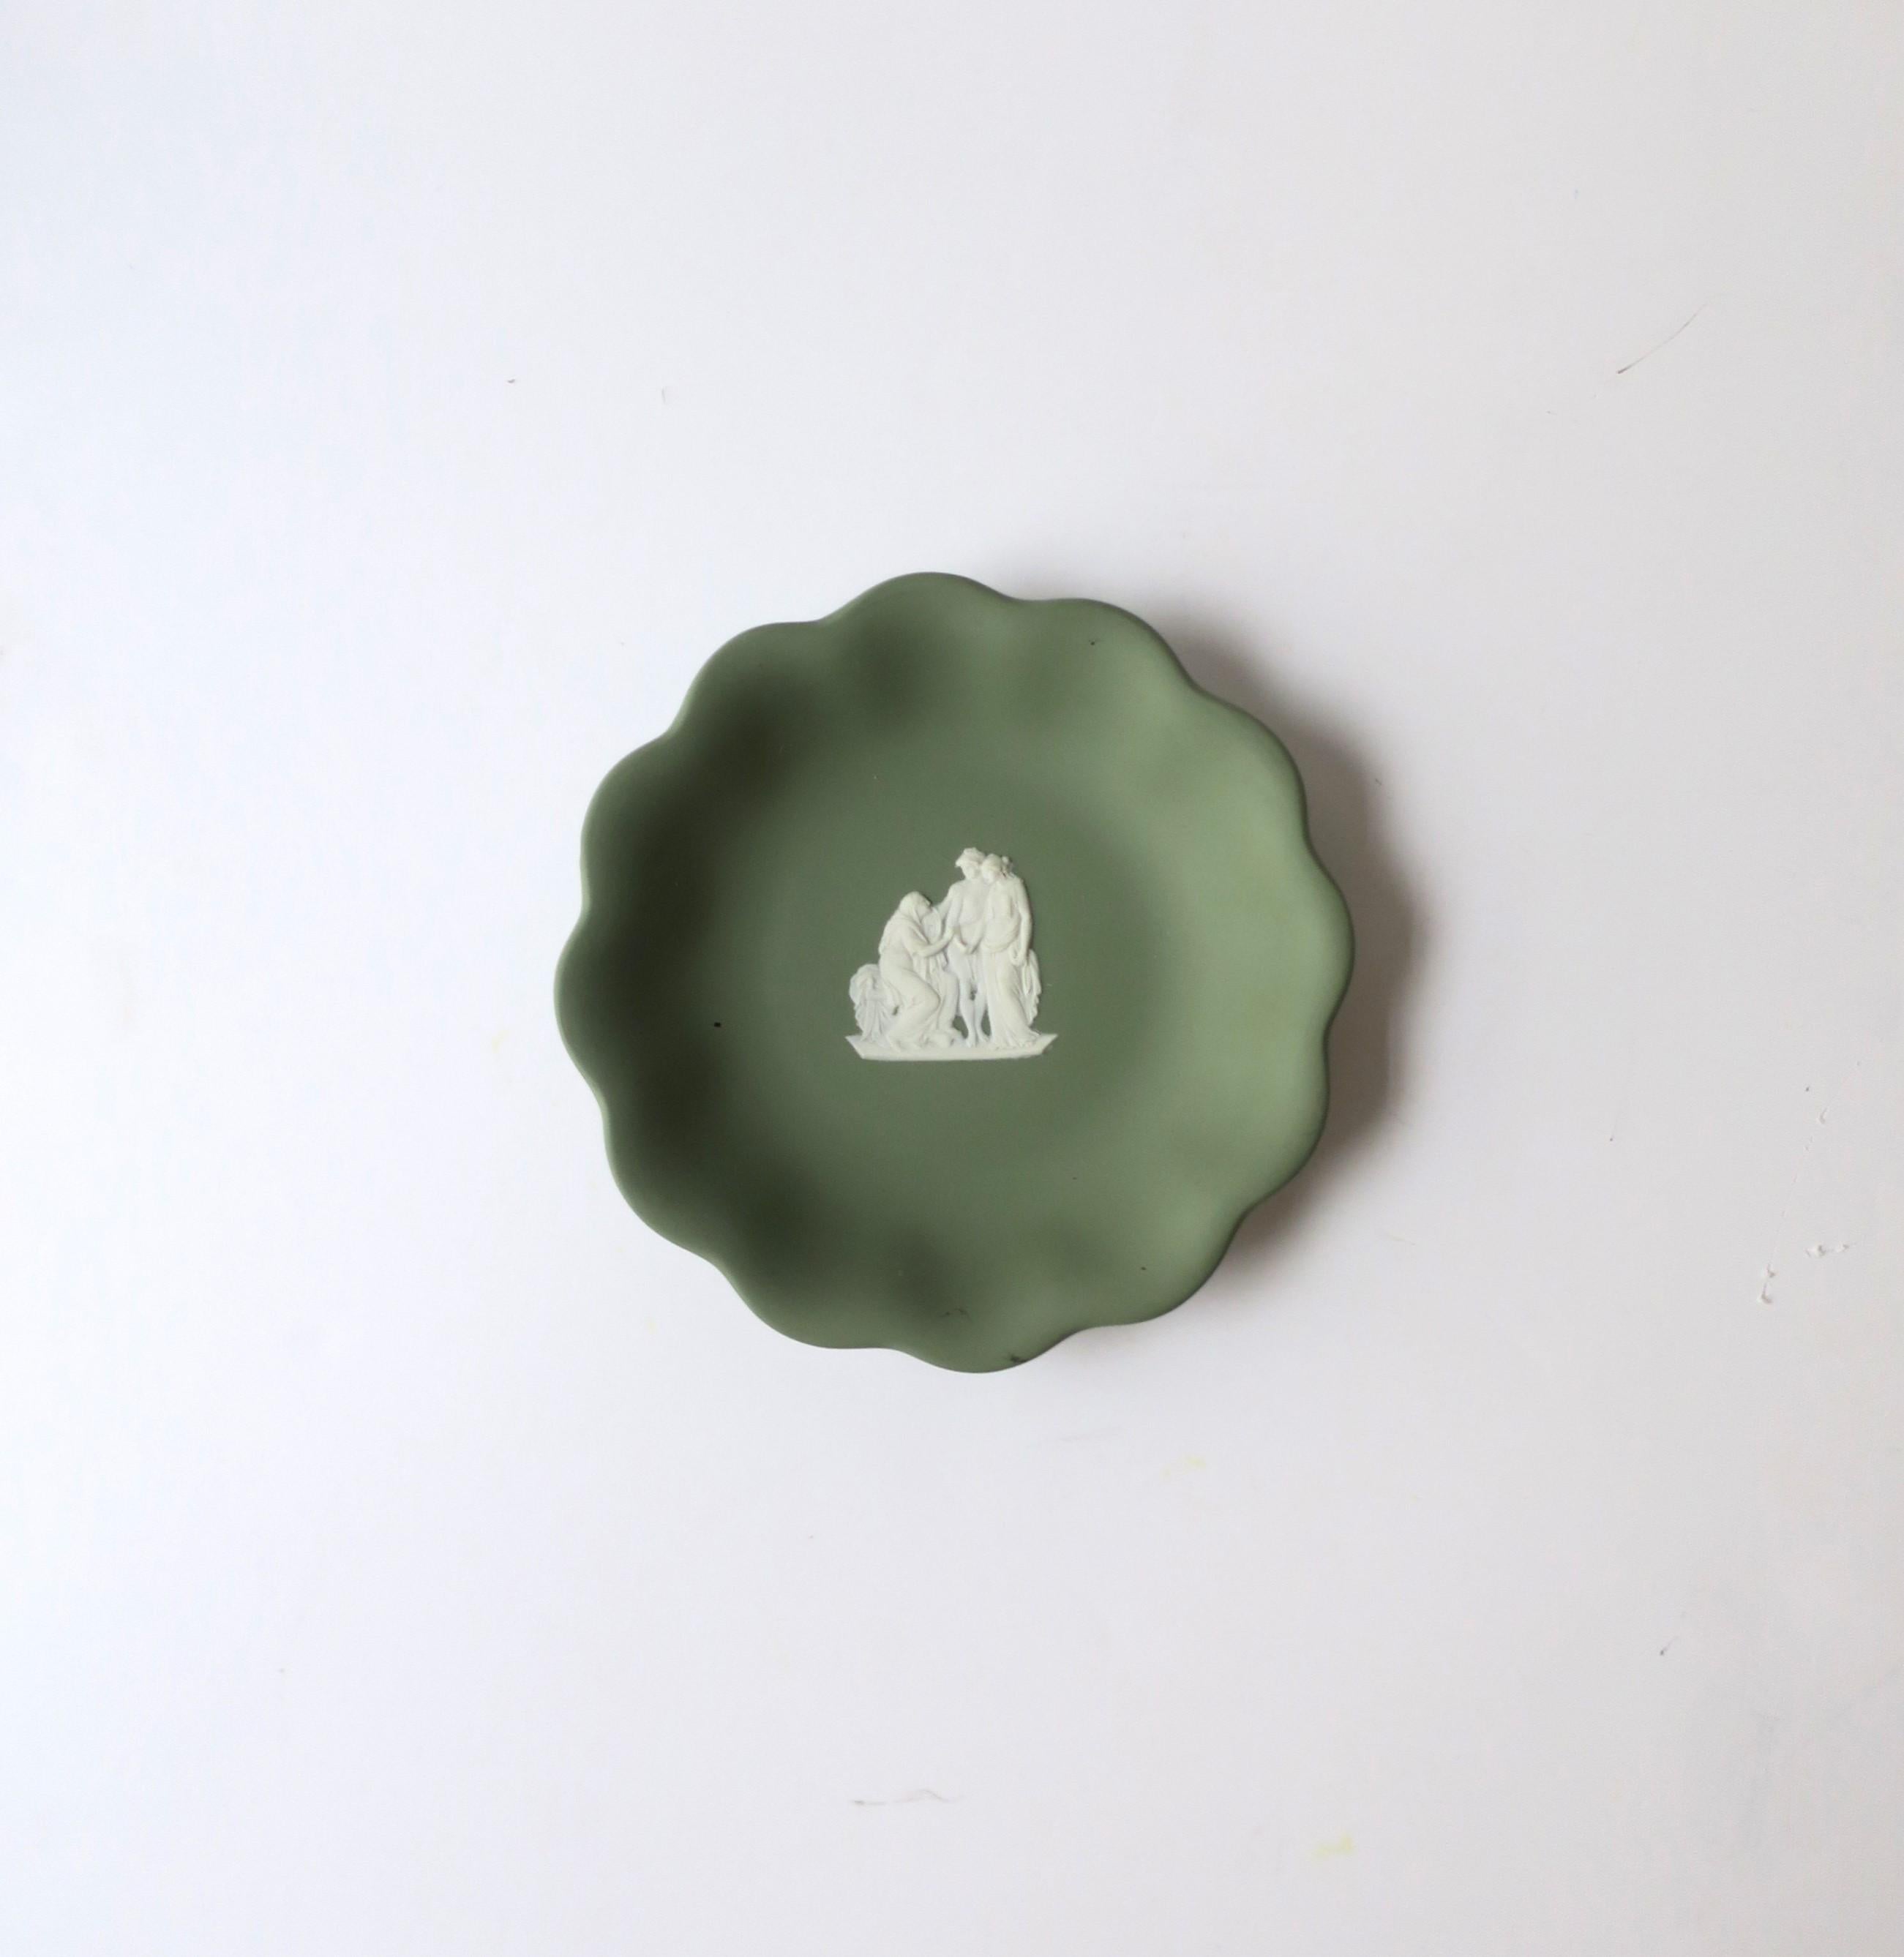 A beautiful English Wedgwood Jasperware sage green and white matte stoneware dish in the Neoclassical design style, mid-20th century, 1962, England. Piece is a matte stoneware in a light sage green with a scalloped edge and a white neoclassical